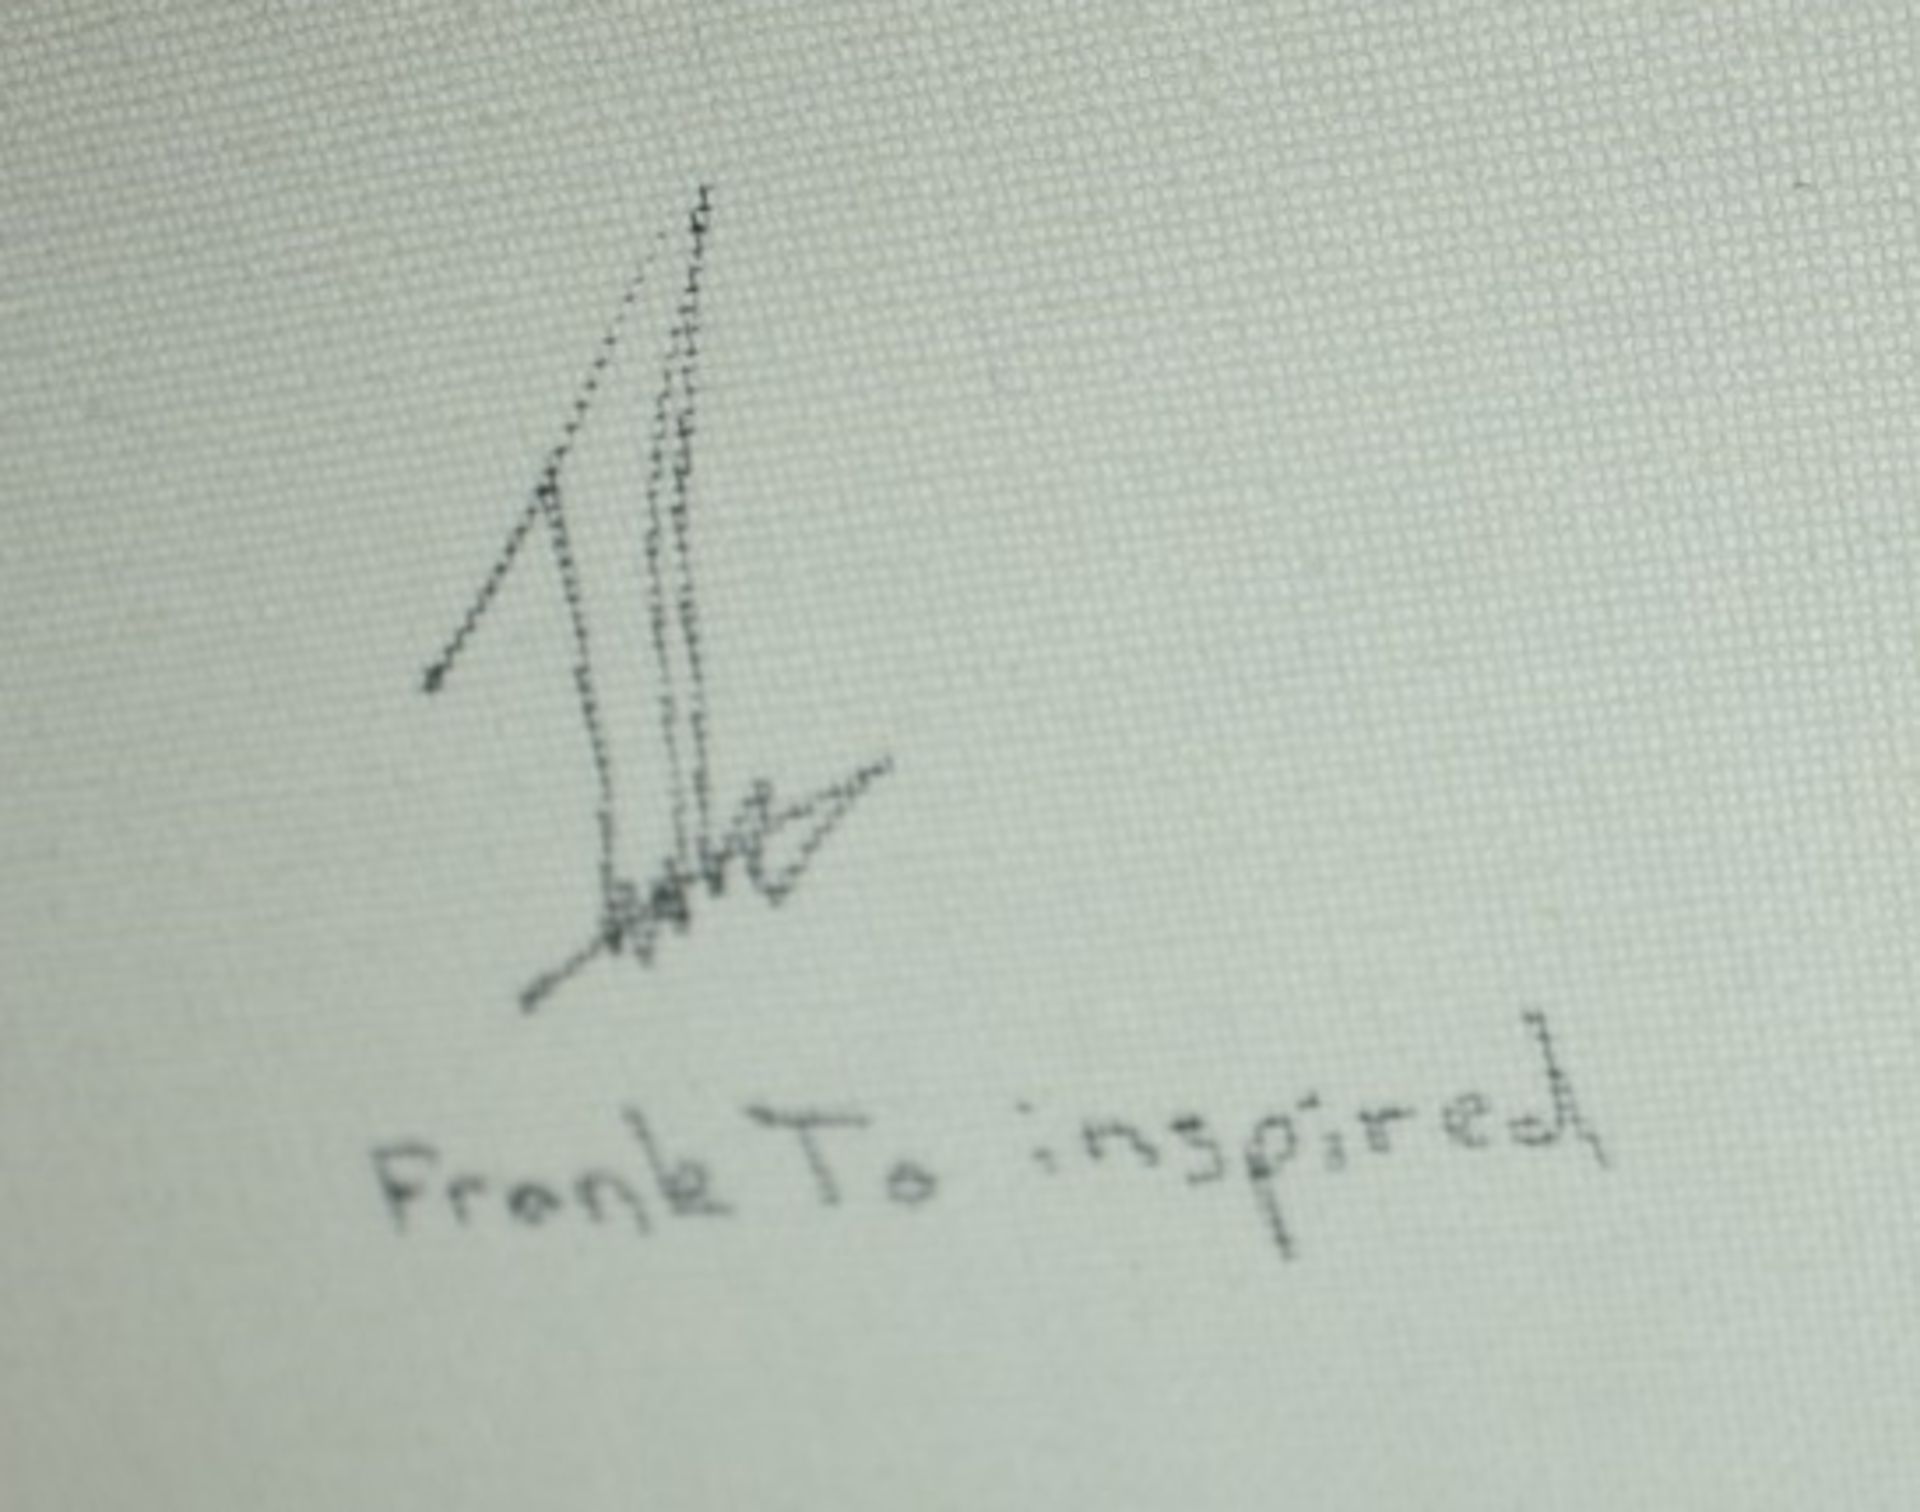 1 x Signed Contemporary Canvas Painting - Signed By Artist With Frank to Inspired Inscription - - Image 2 of 6